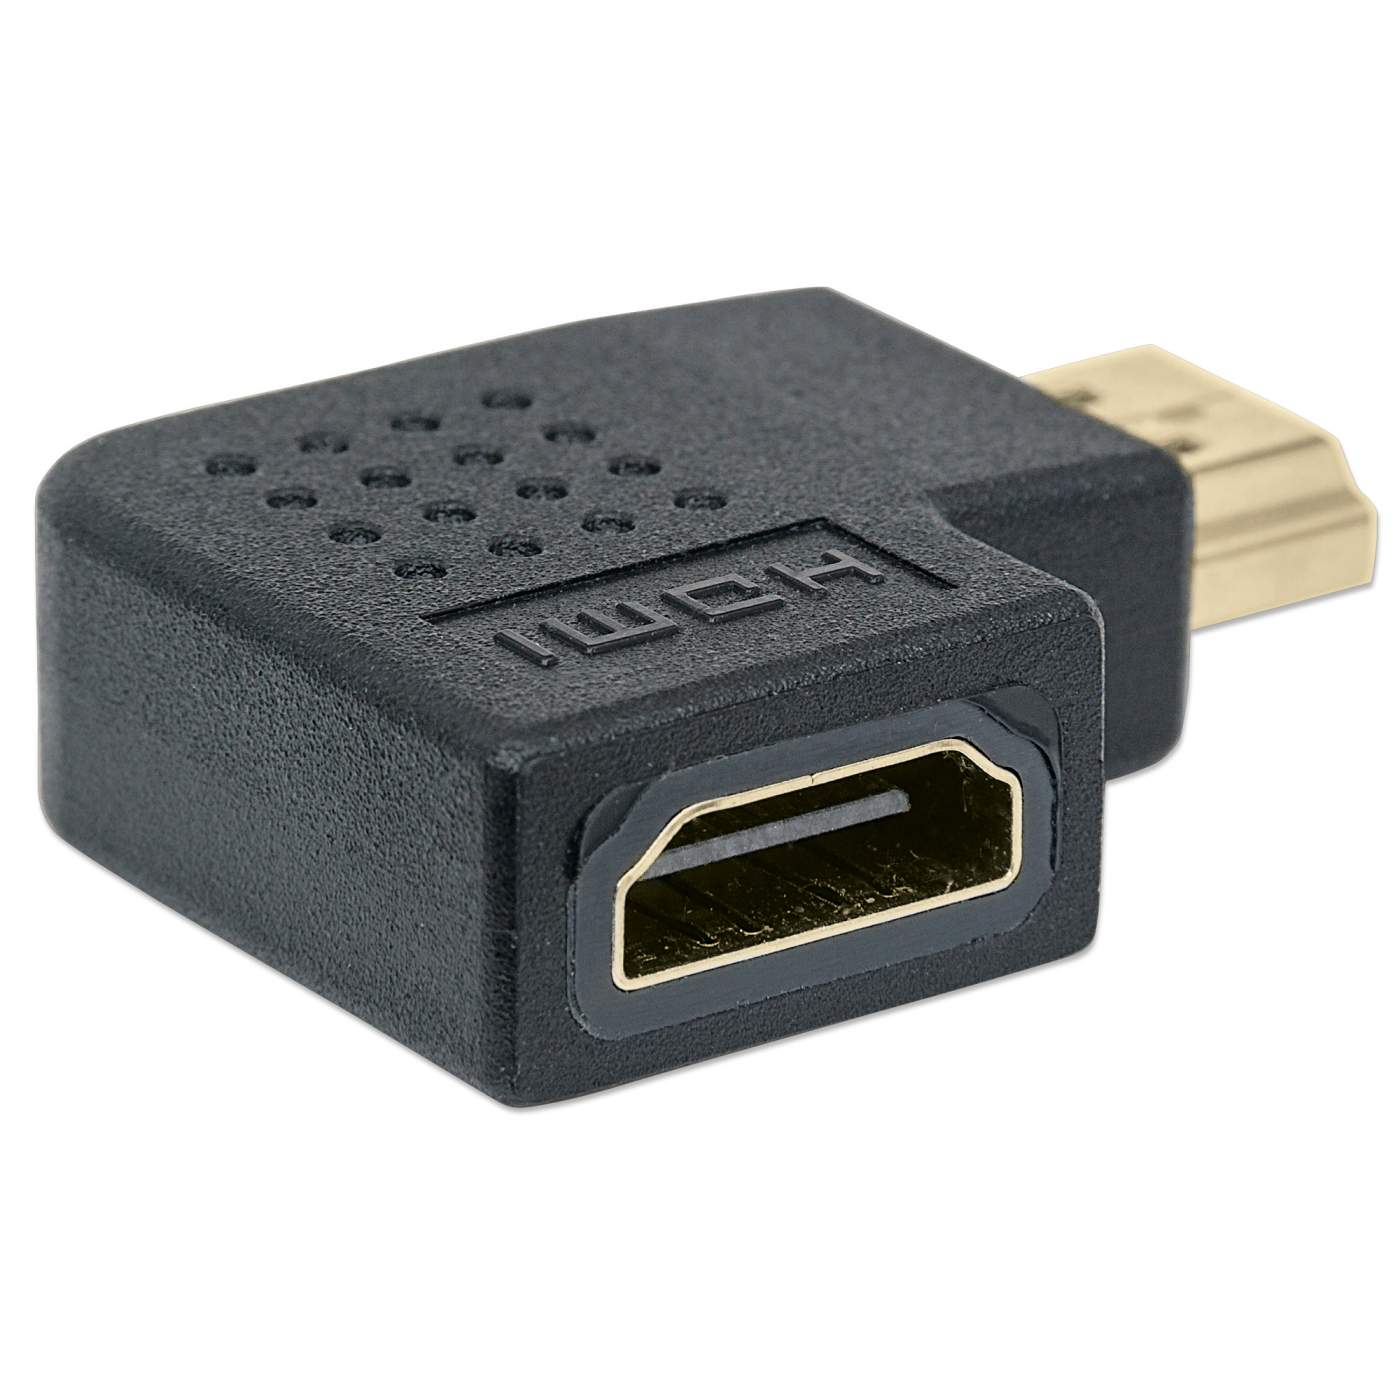 Ugreen cable adapter cable HDMI adapter - micro HDMI 19 pin 20cm